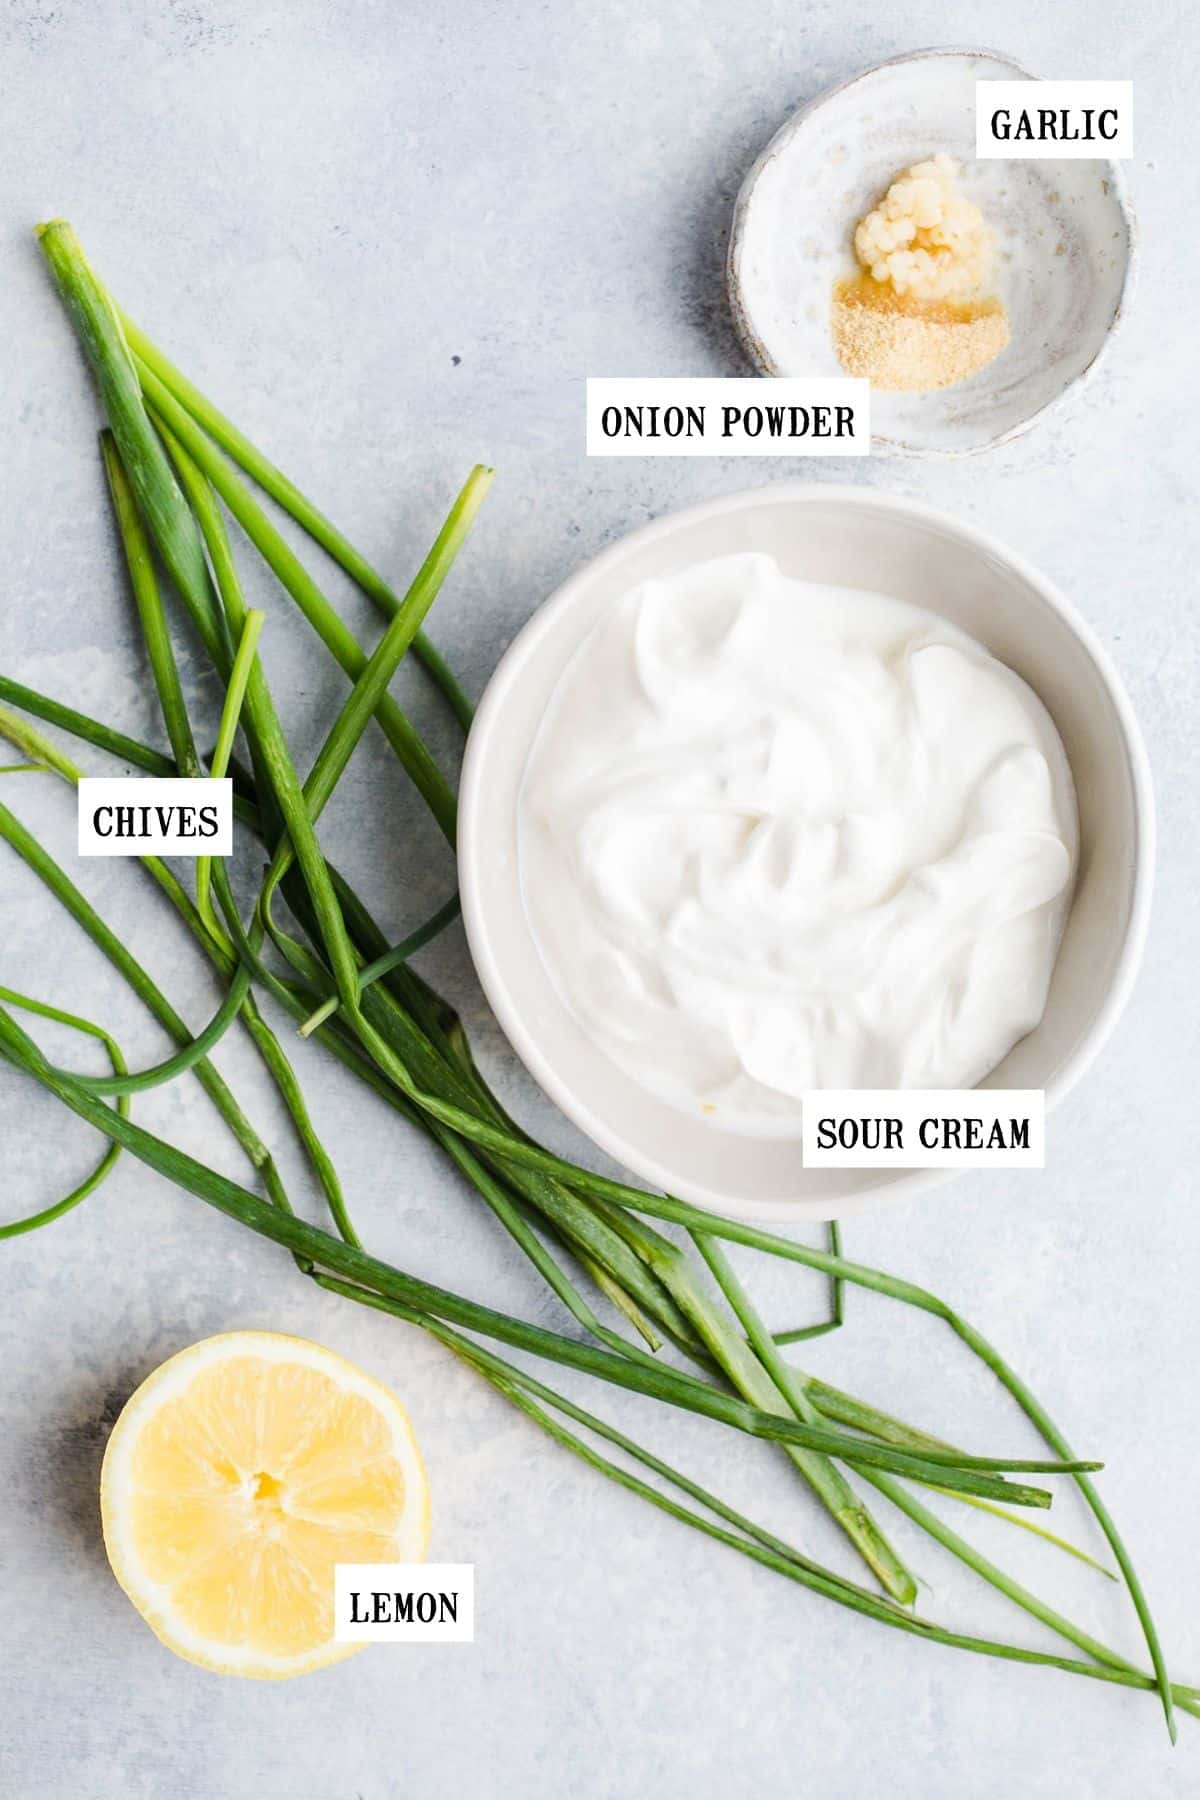 Ingredients to make a fresh dip in small bowls.